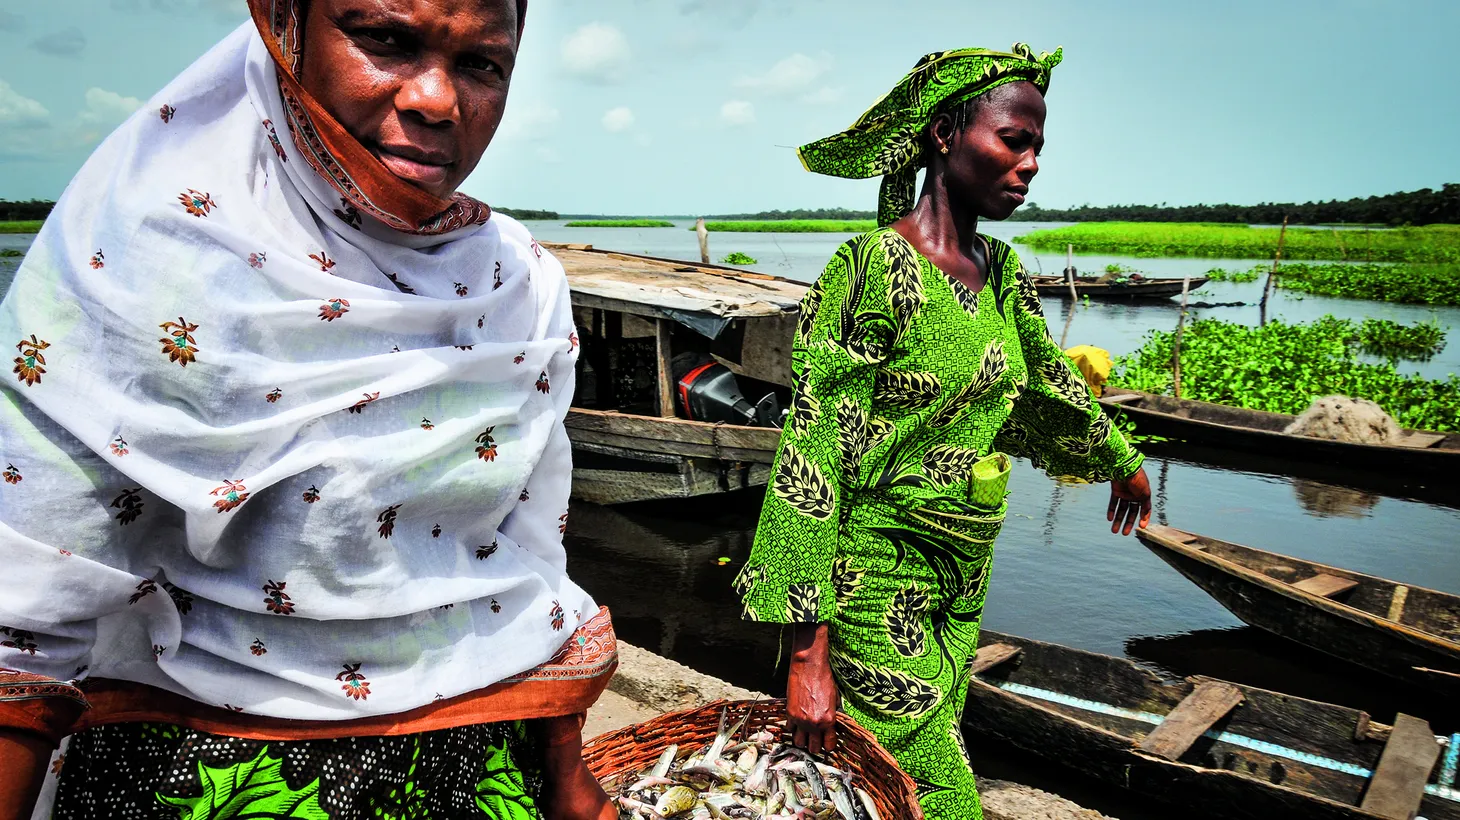 Women carry a basket of fish in Lagos, where food writer Yewande Komolafe returned after 20 years to reconnect with the home she left behind.